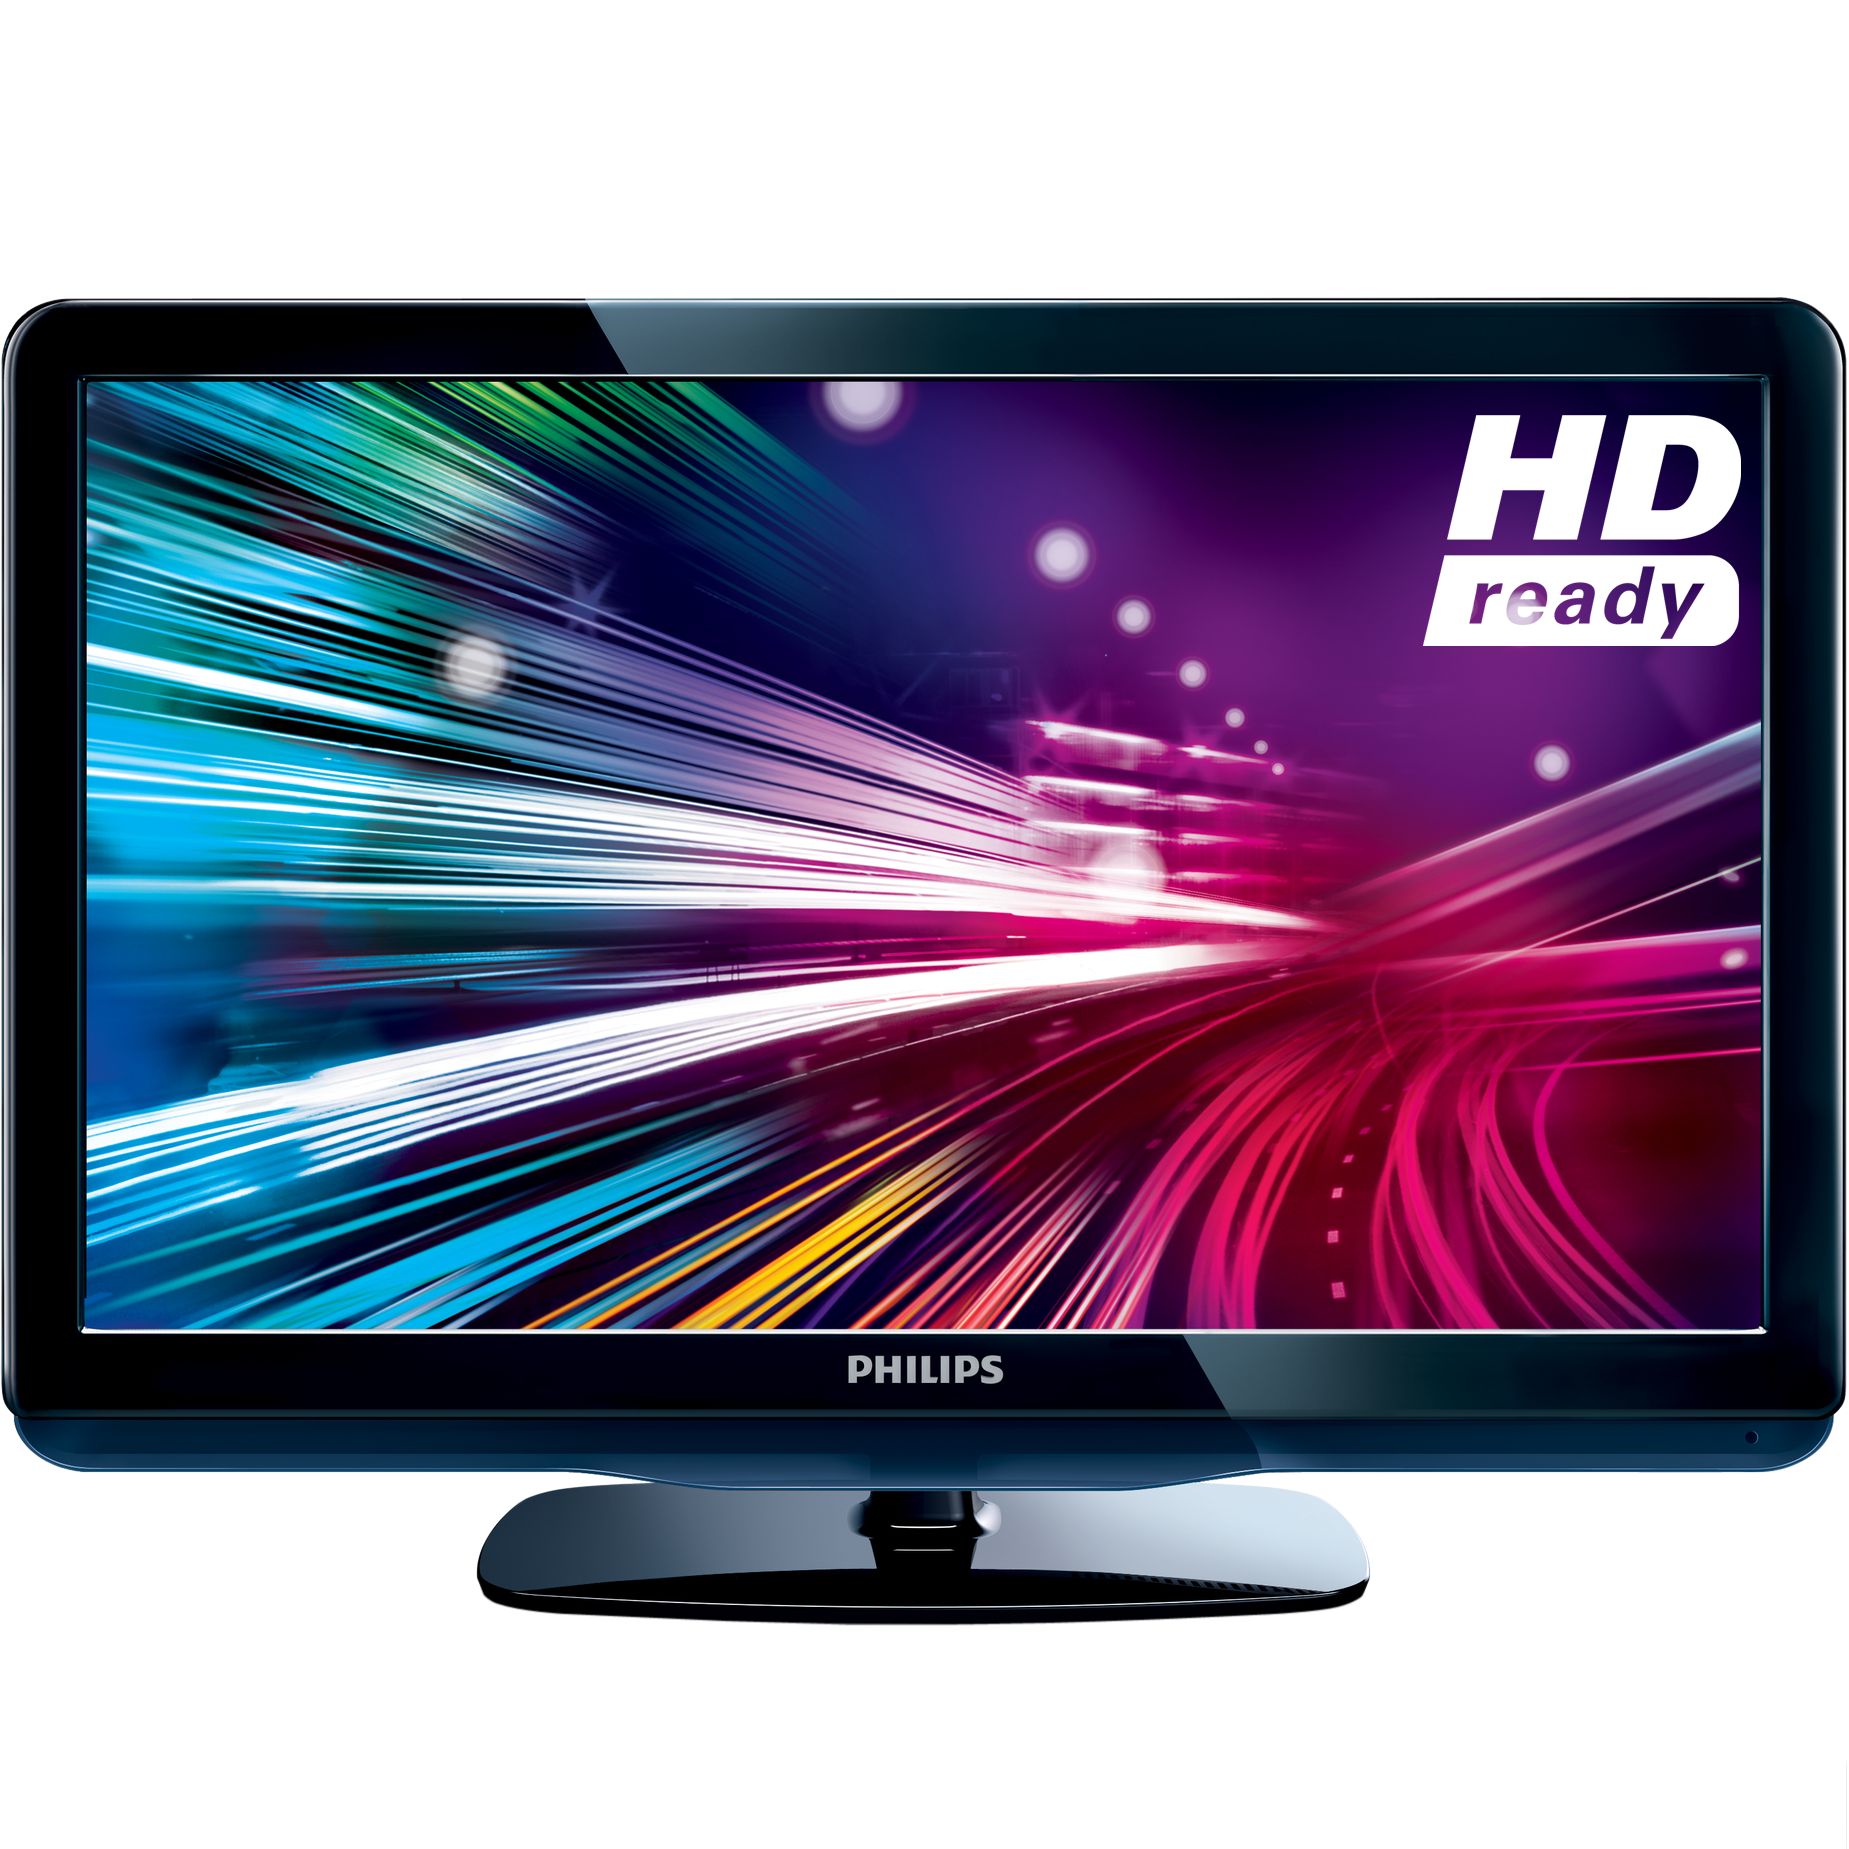 Philips 22PFL3805H LED HD Ready Digital Television/DVD Combi, 22 Inch at John Lewis